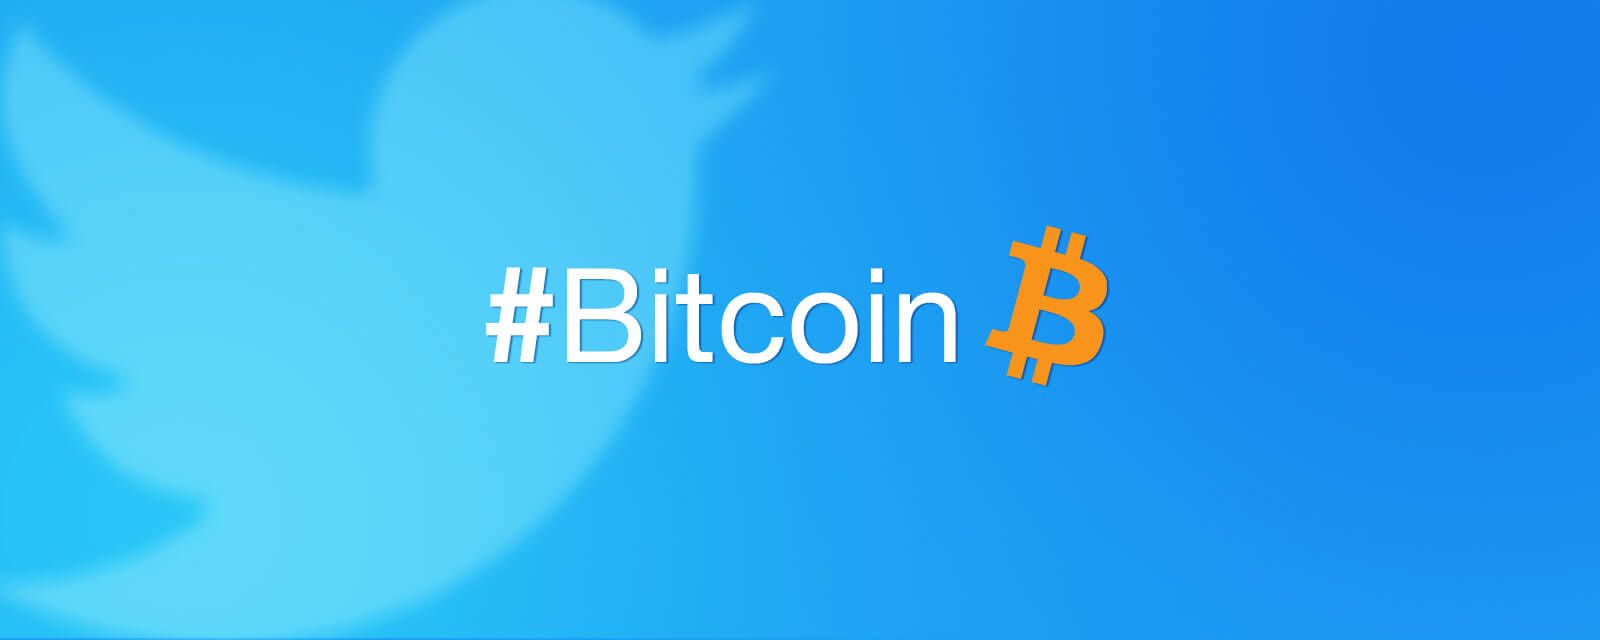 Bitcoin Twitter: The top 7 people to follow right now